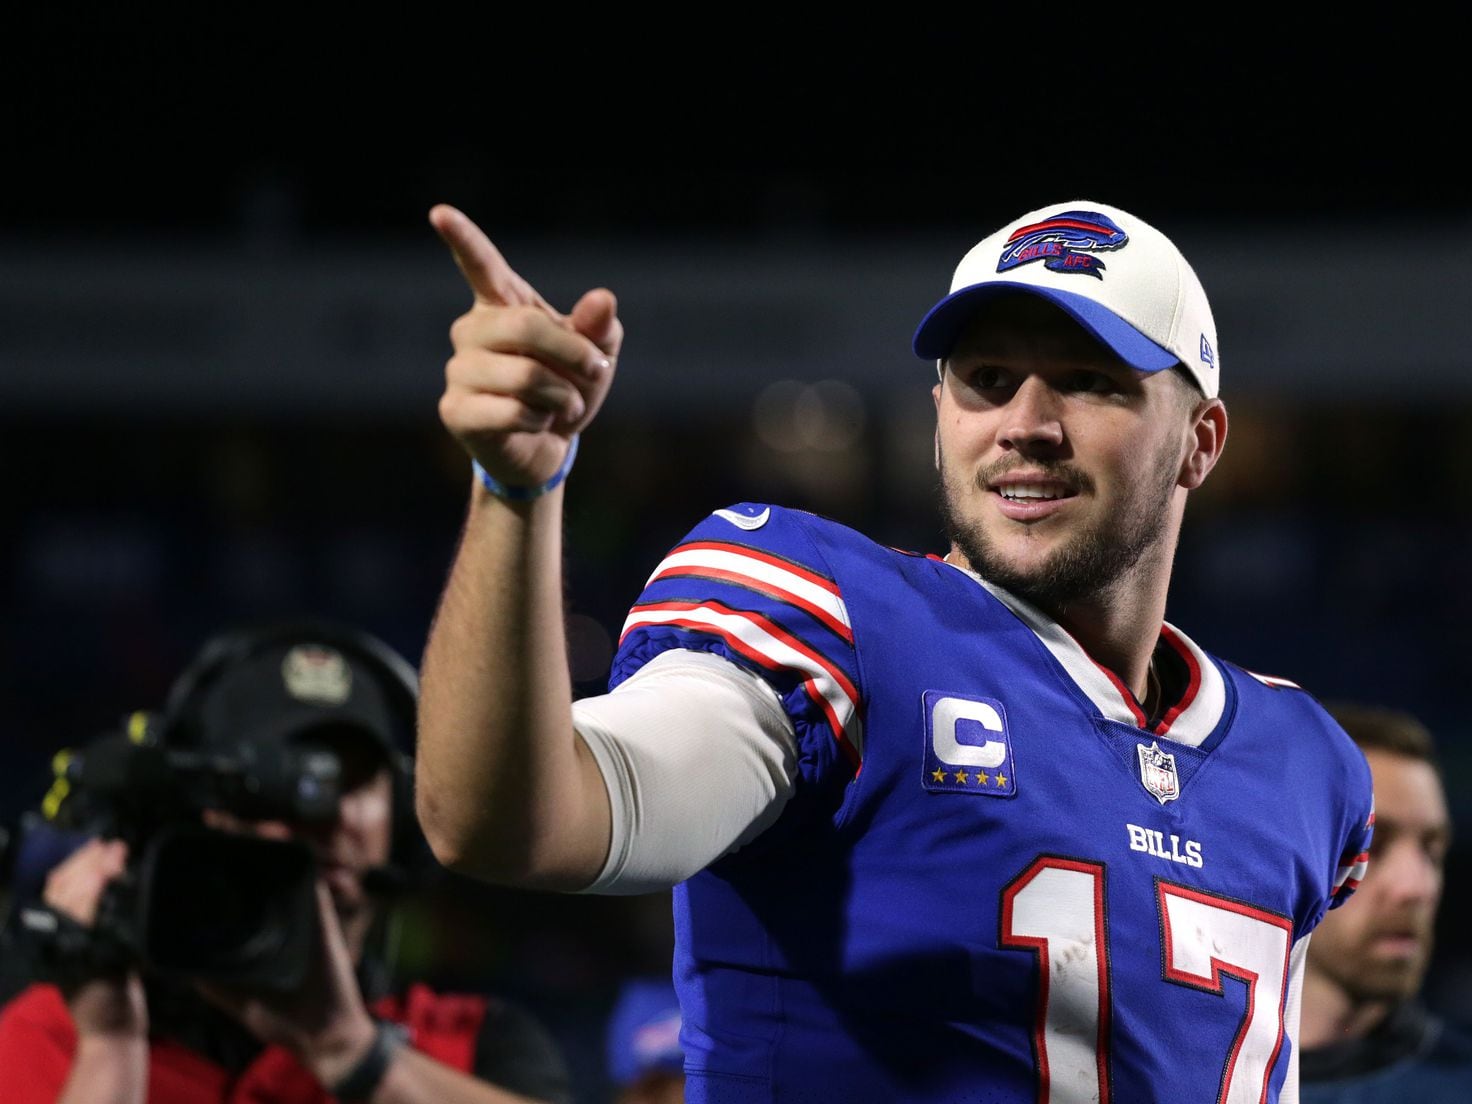 How Many Madden Cover Athletes Can Josh Allen Name In 30 Seconds?